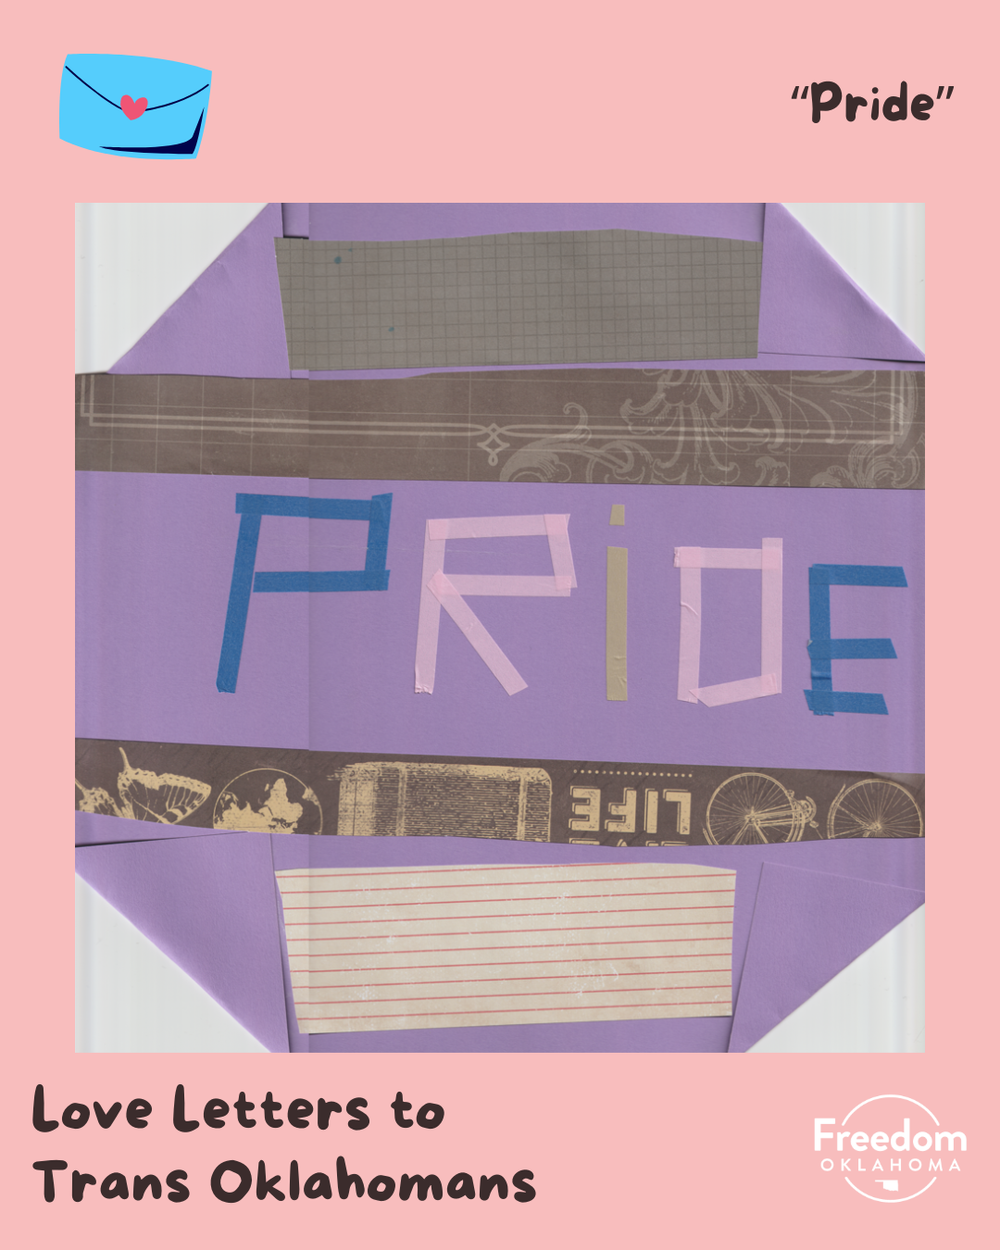  Similar pink graphic with artwork in the center: Scanned image of a mixed media collage. A piece of purple paper is folded at each corner. In the center is "Pride" spelled out with tape and there are scraps of random paper glued around the text. 